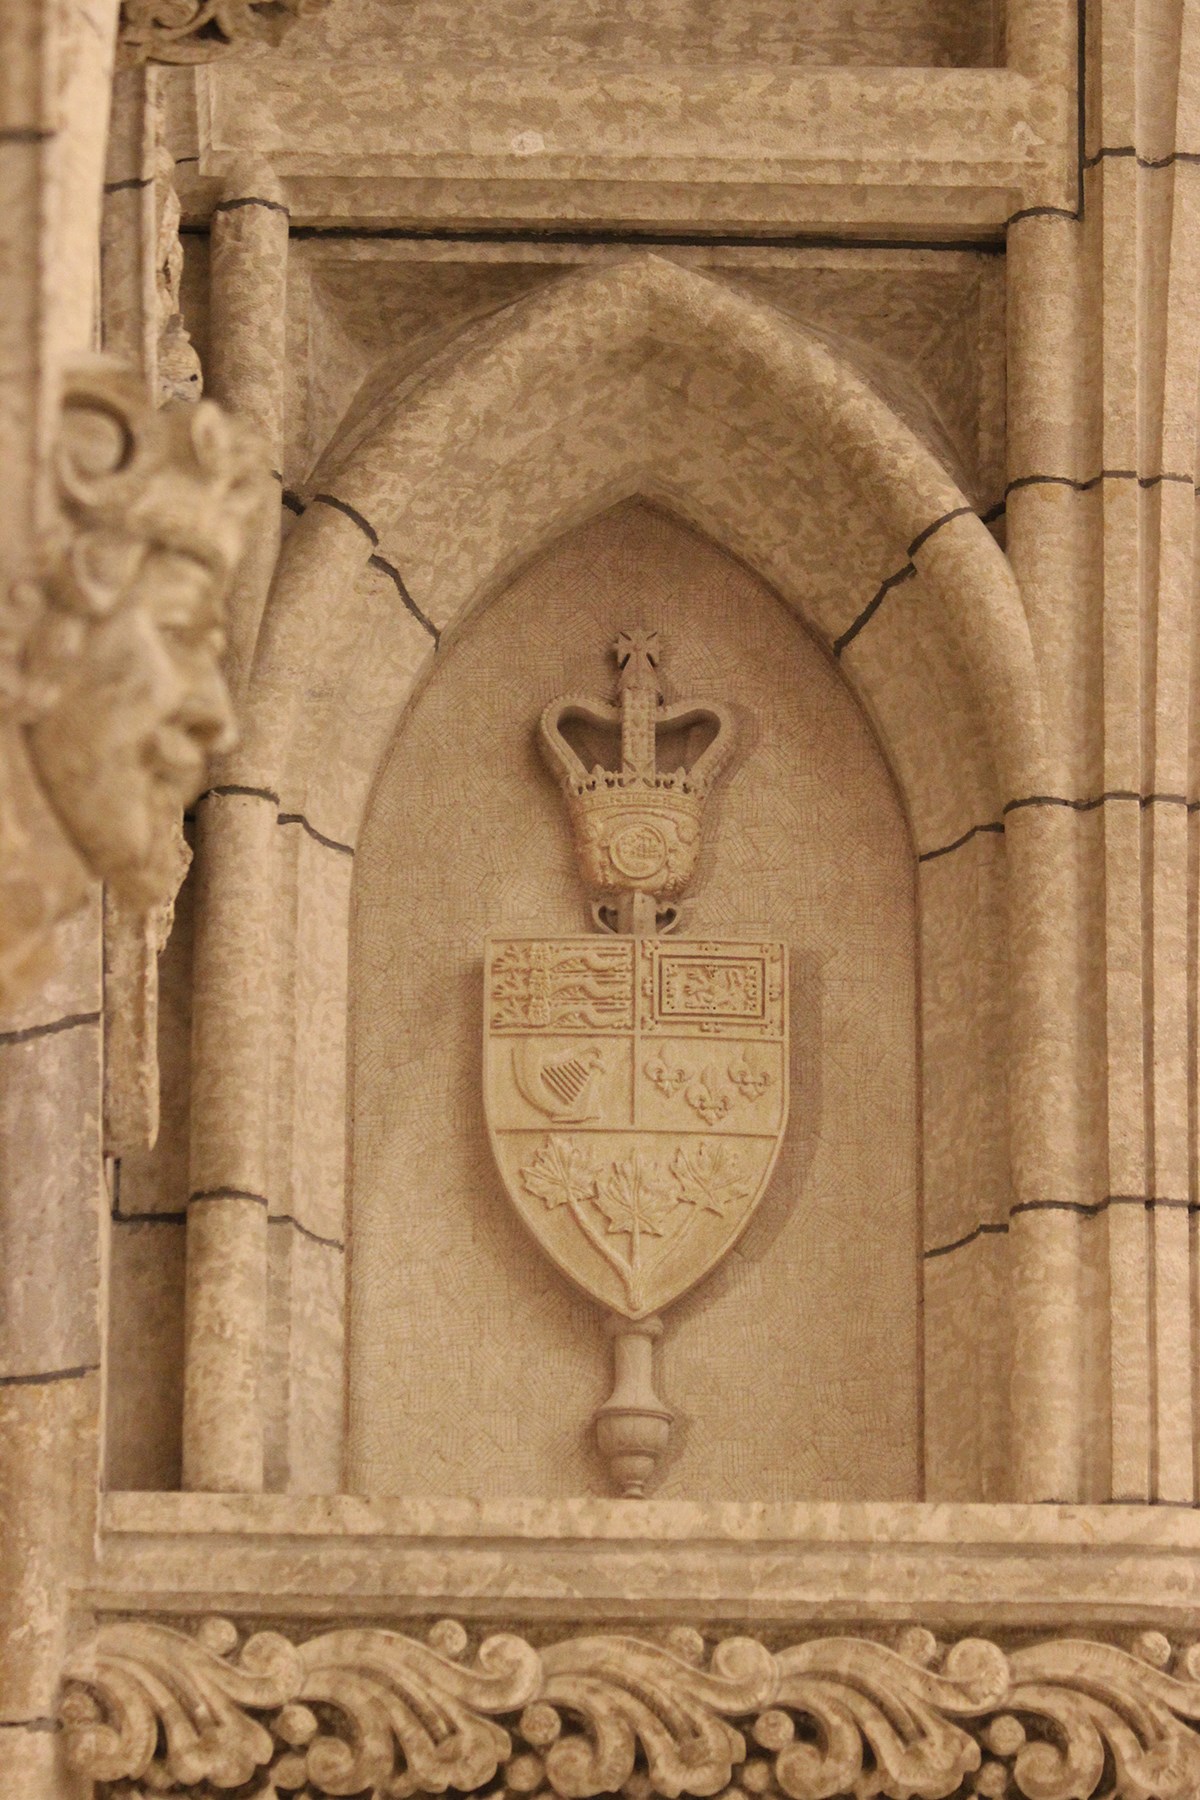 Mr. Smith worked with former Dominion Sculptor Phil White in 2011, carving this Senate emblem high up in Centre Block’s Hall of Honour. (Photo credit: John-Philippe Smith)